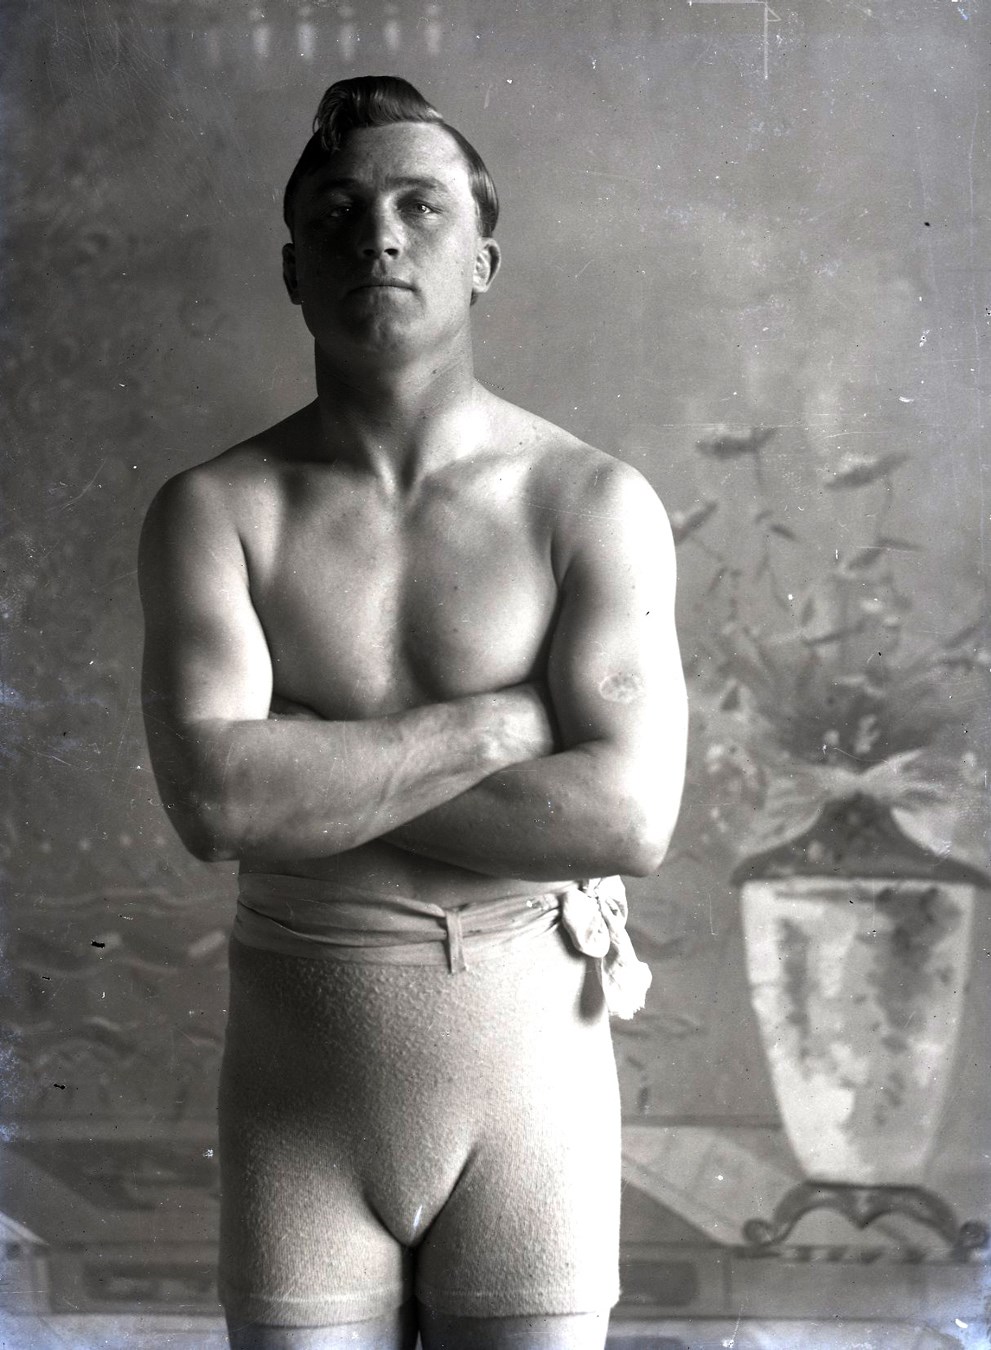 Dana Collection Of Important Boxing Negatives - Early 1900s Fireman Jim Flynn "Boxing Pose" Type I Glass Plate Negative by Dana Studio